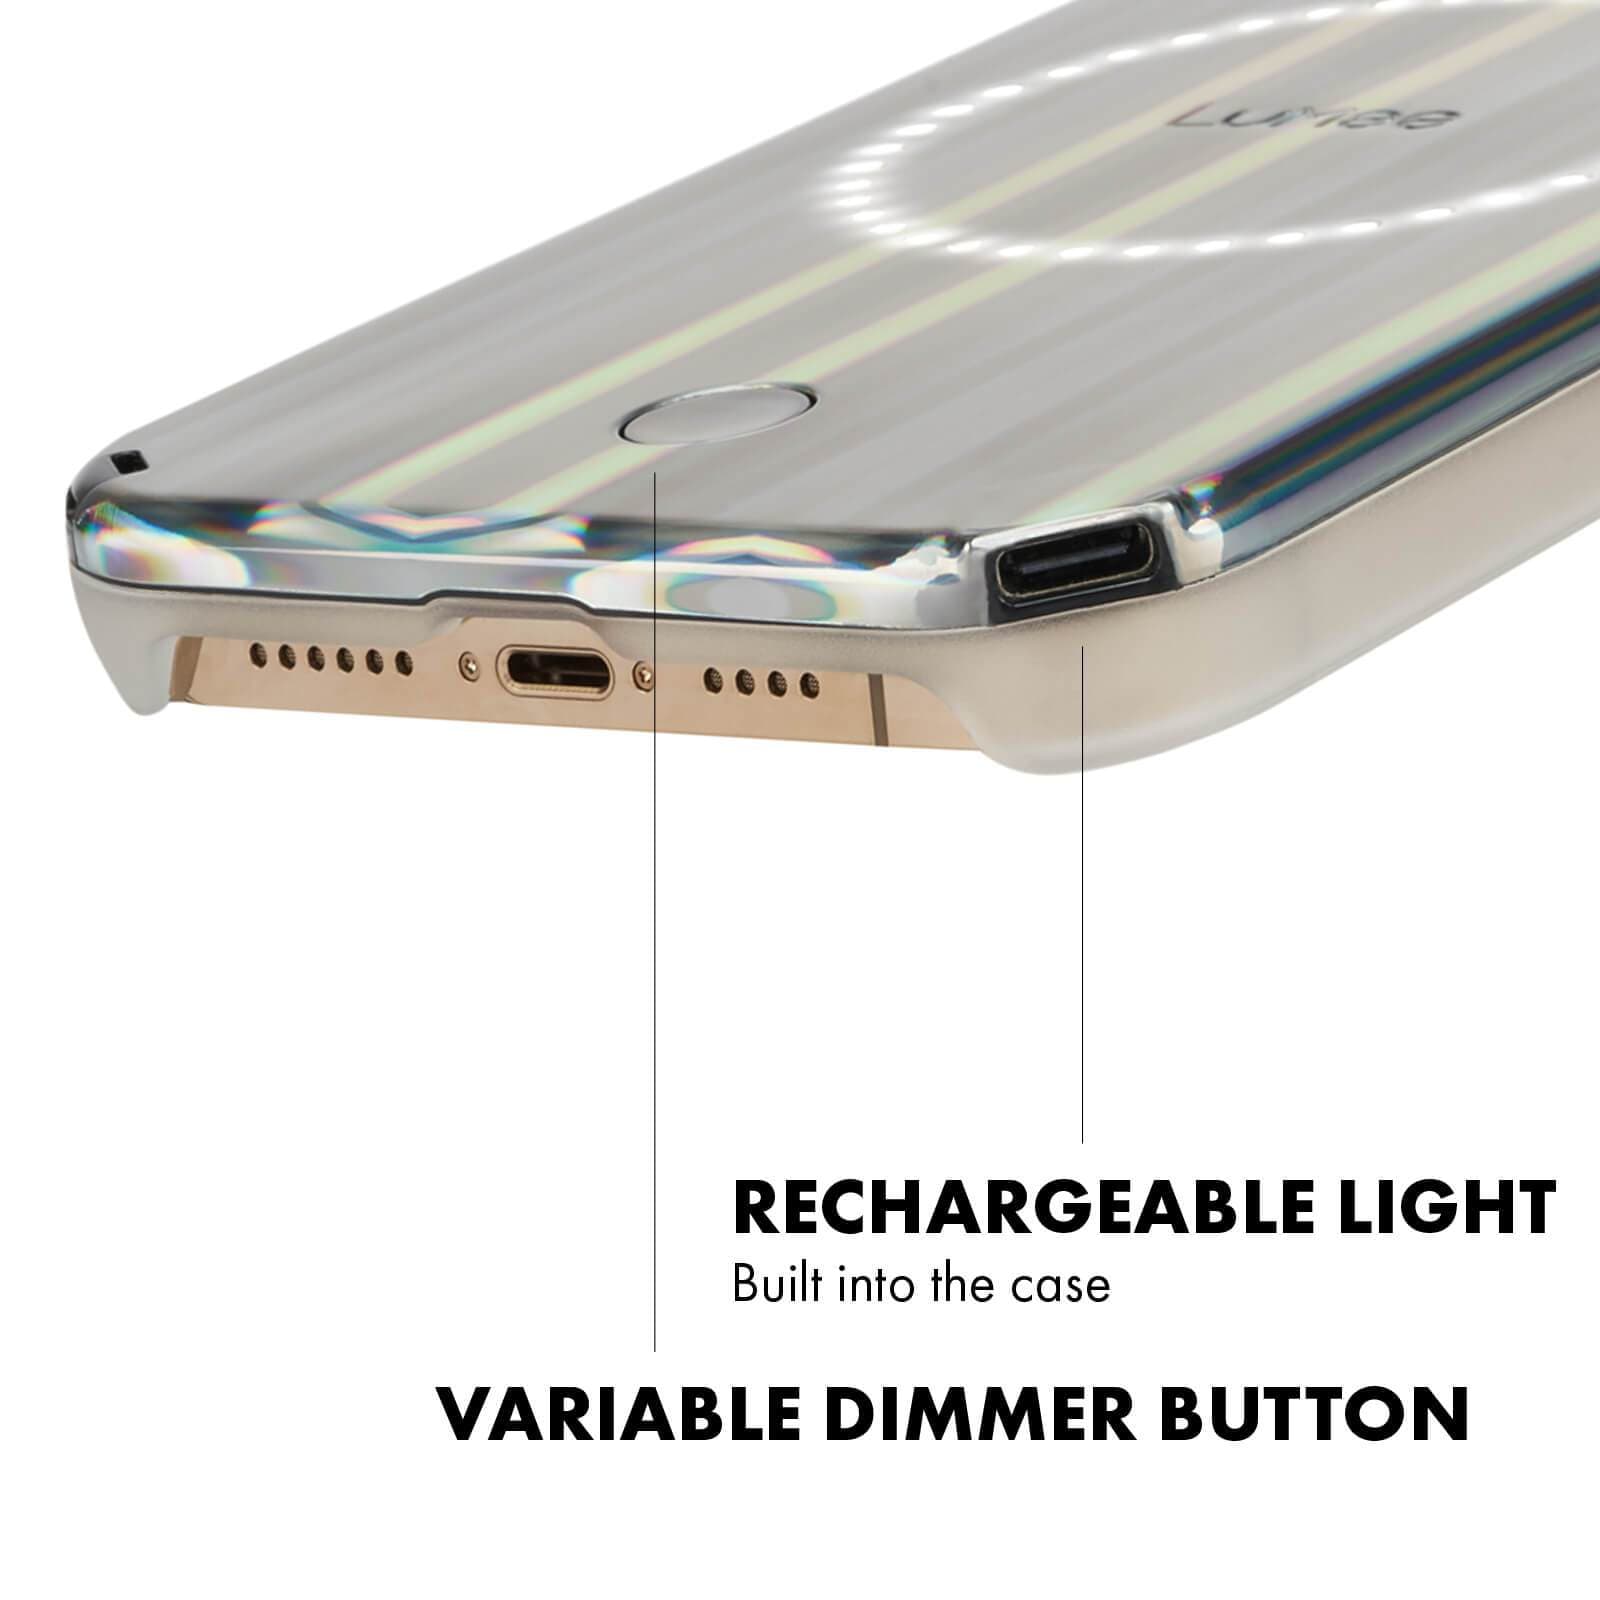 RECHARGEABLE LIGHT BUILT INTO THE CASE, VARIABLE DIMMER BUTTON. COLOR::HOLOGRAPHIC